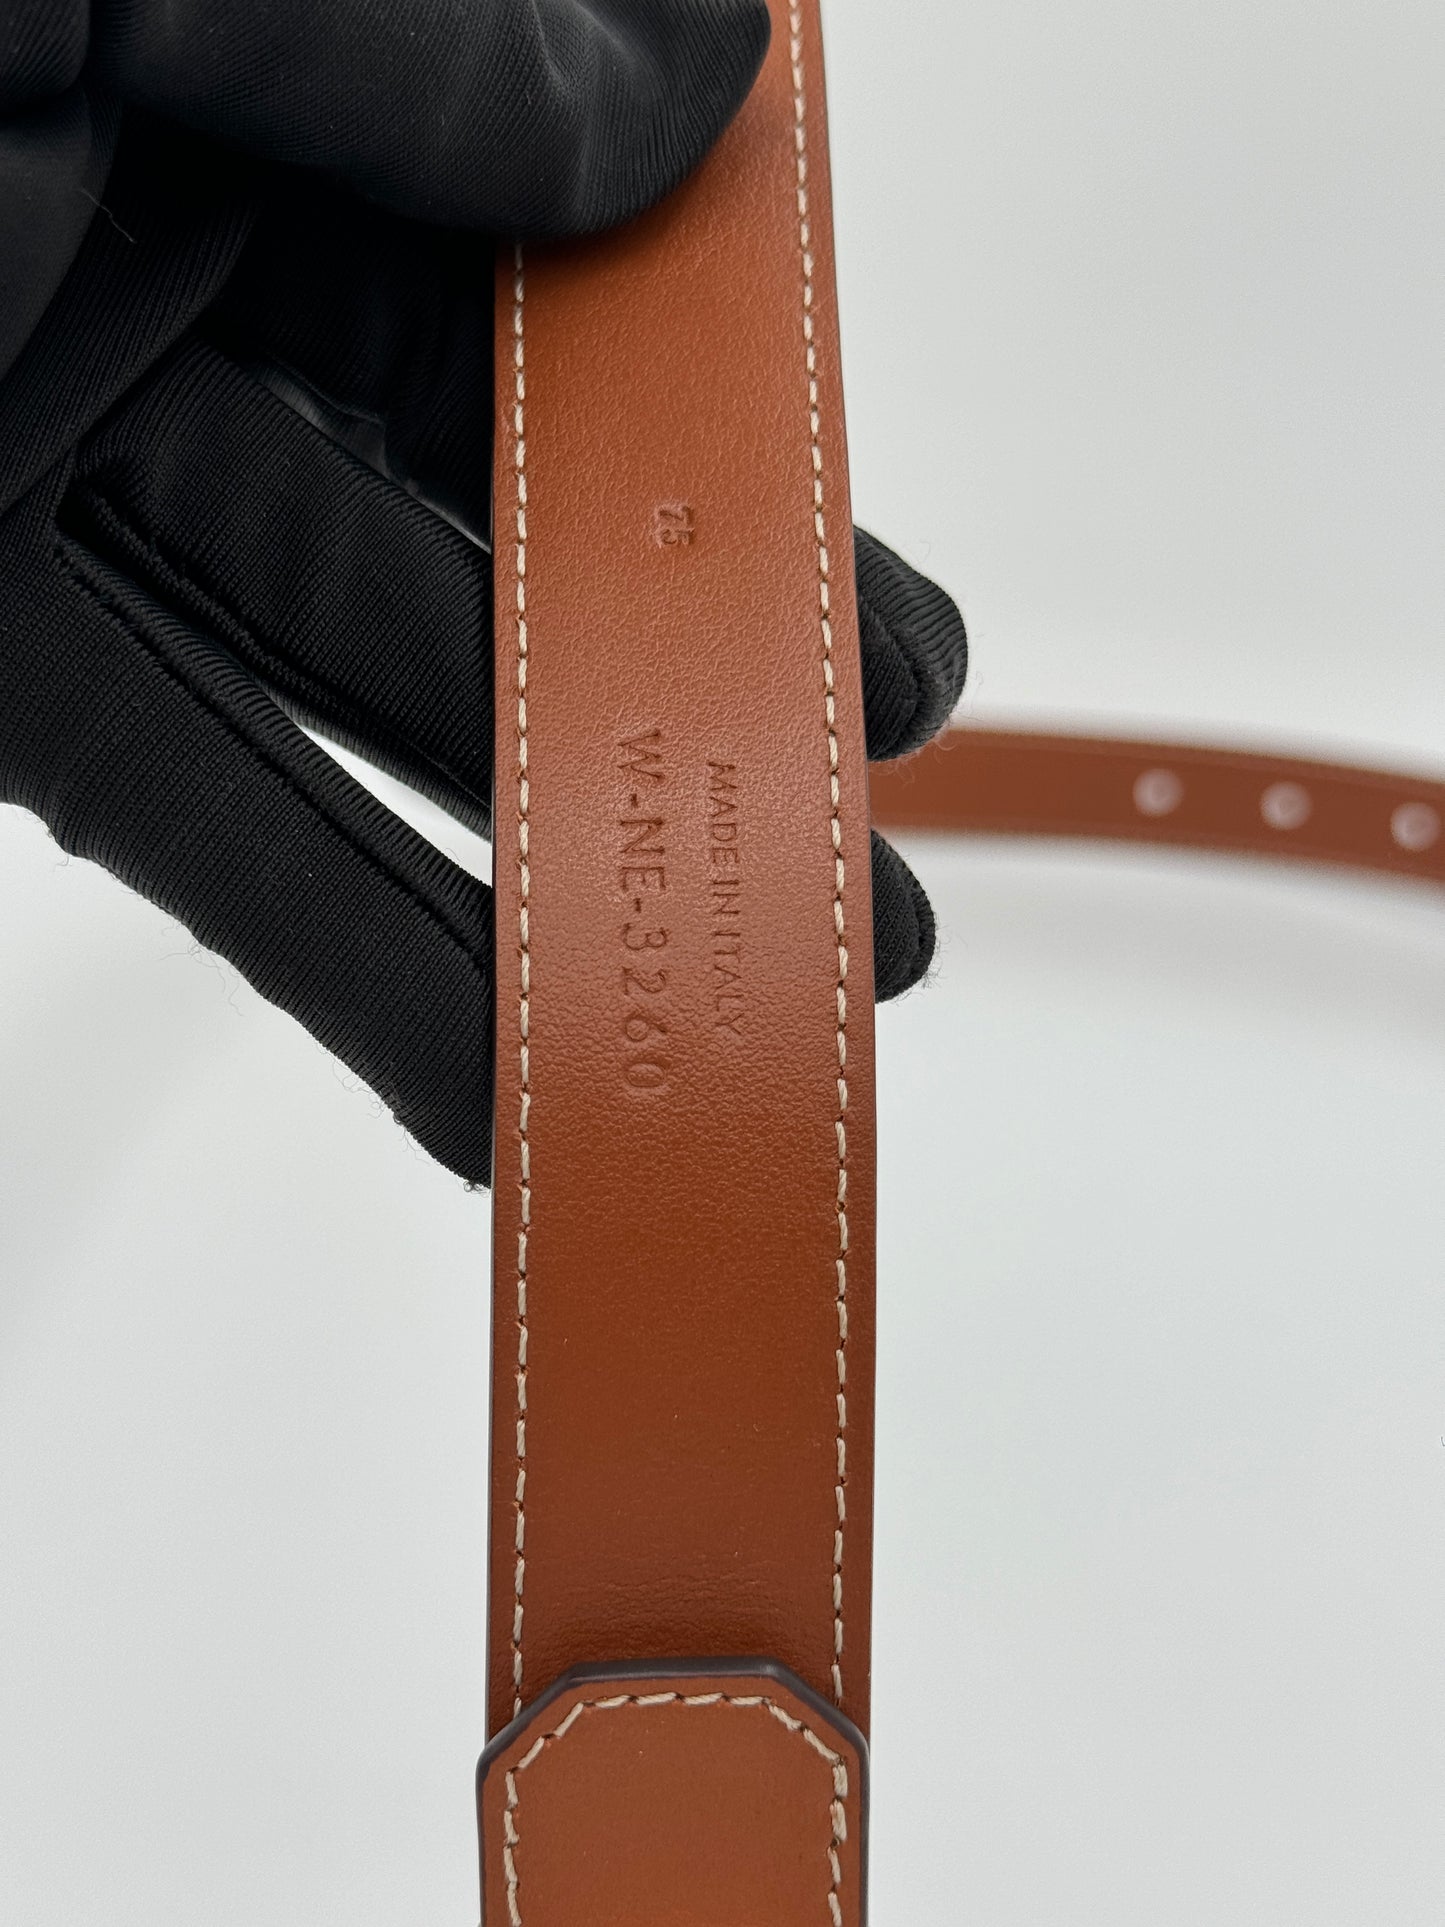 CELINE SMALL TRIOMPHE BELT IN LEATHER BROWN 75